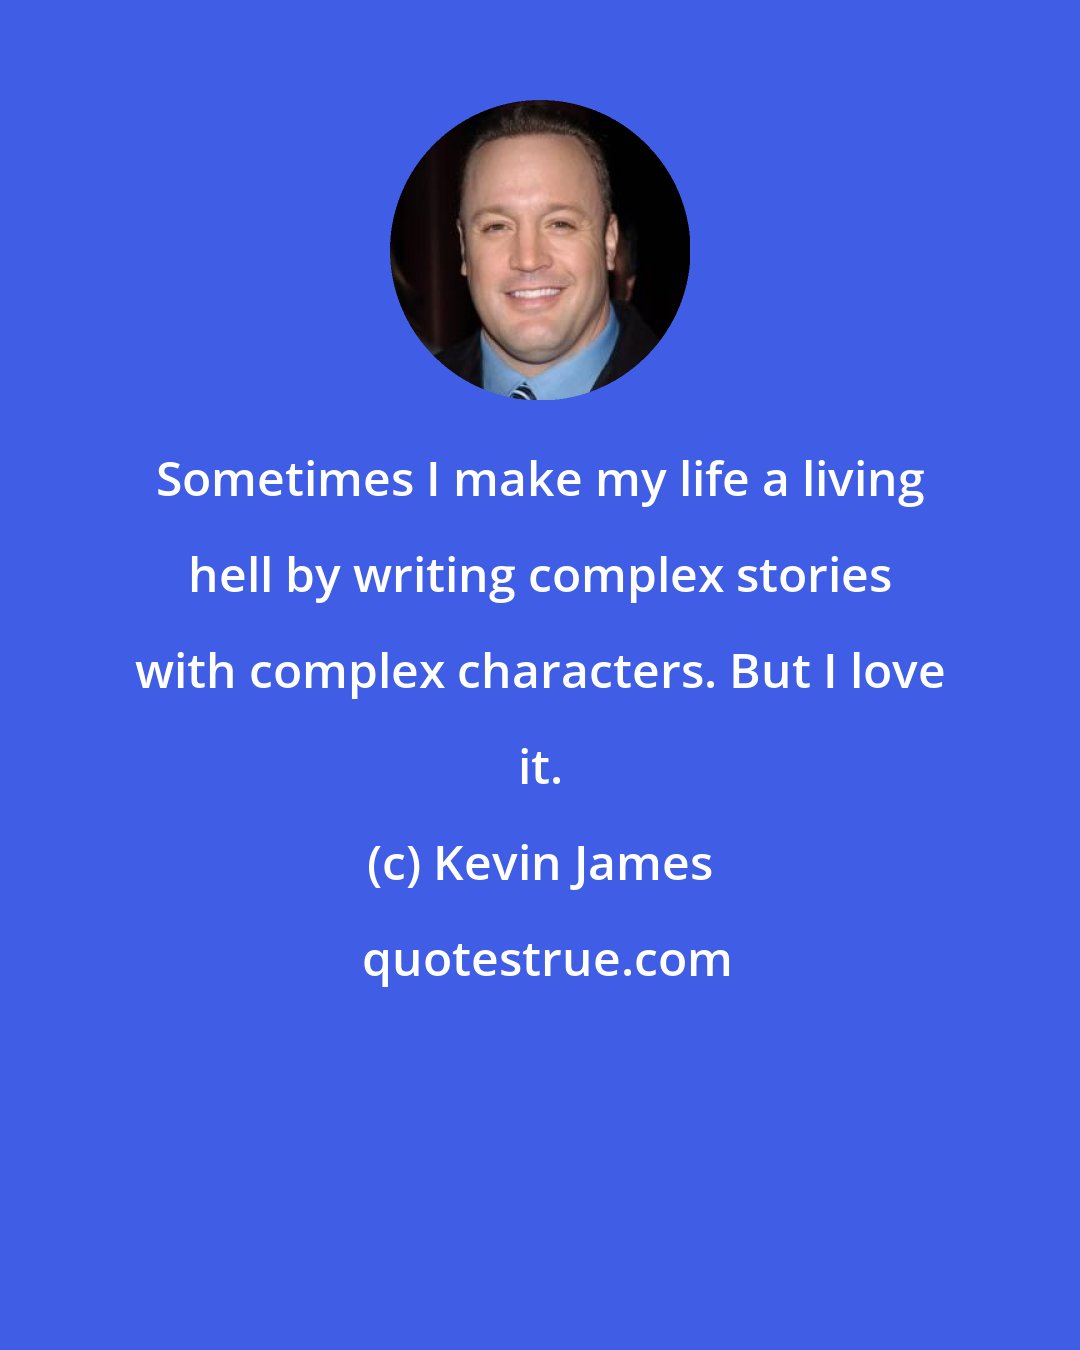 Kevin James: Sometimes I make my life a living hell by writing complex stories with complex characters. But I love it.